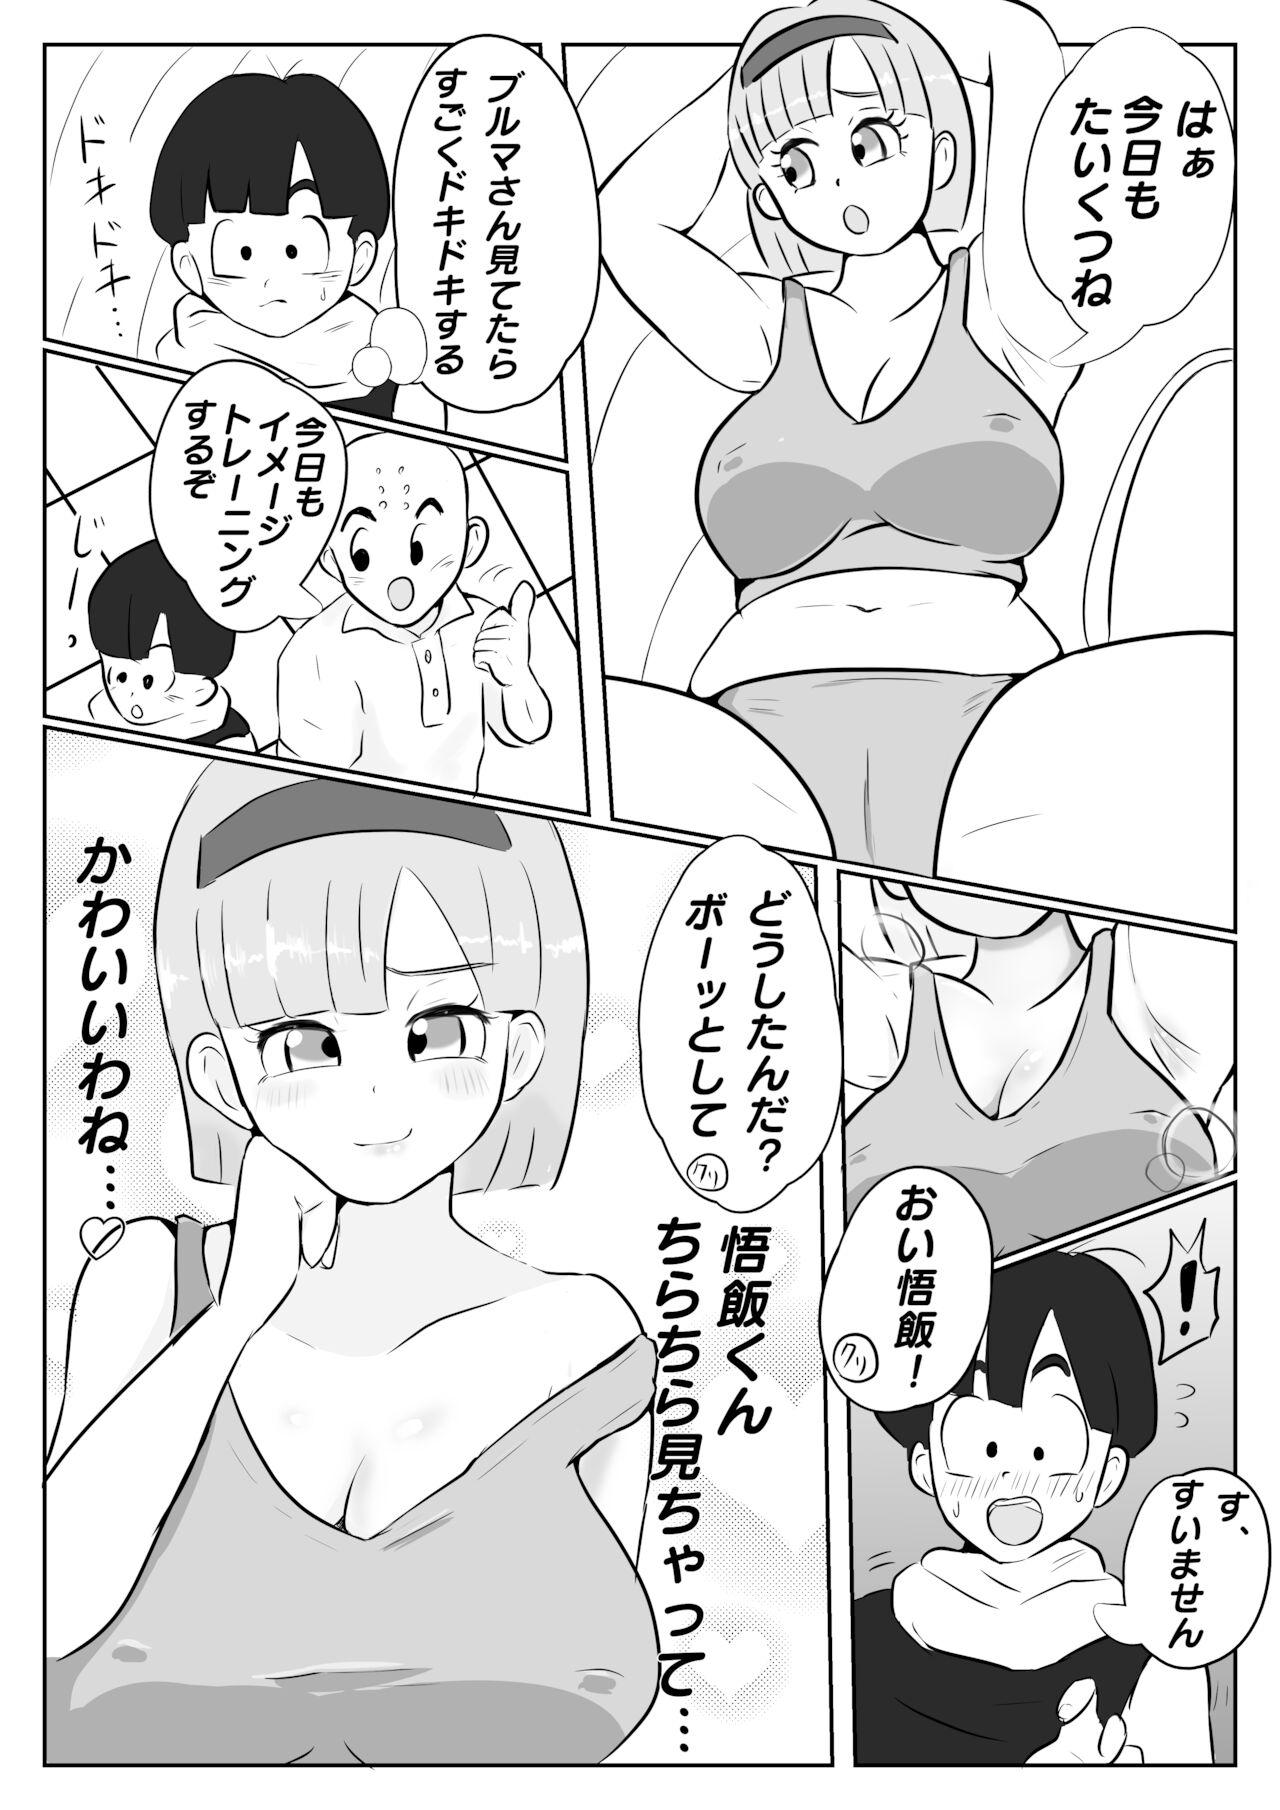 Cutie Why Gohan was thrilled to planet Namek - Dragon ball z Oldvsyoung - Page 6